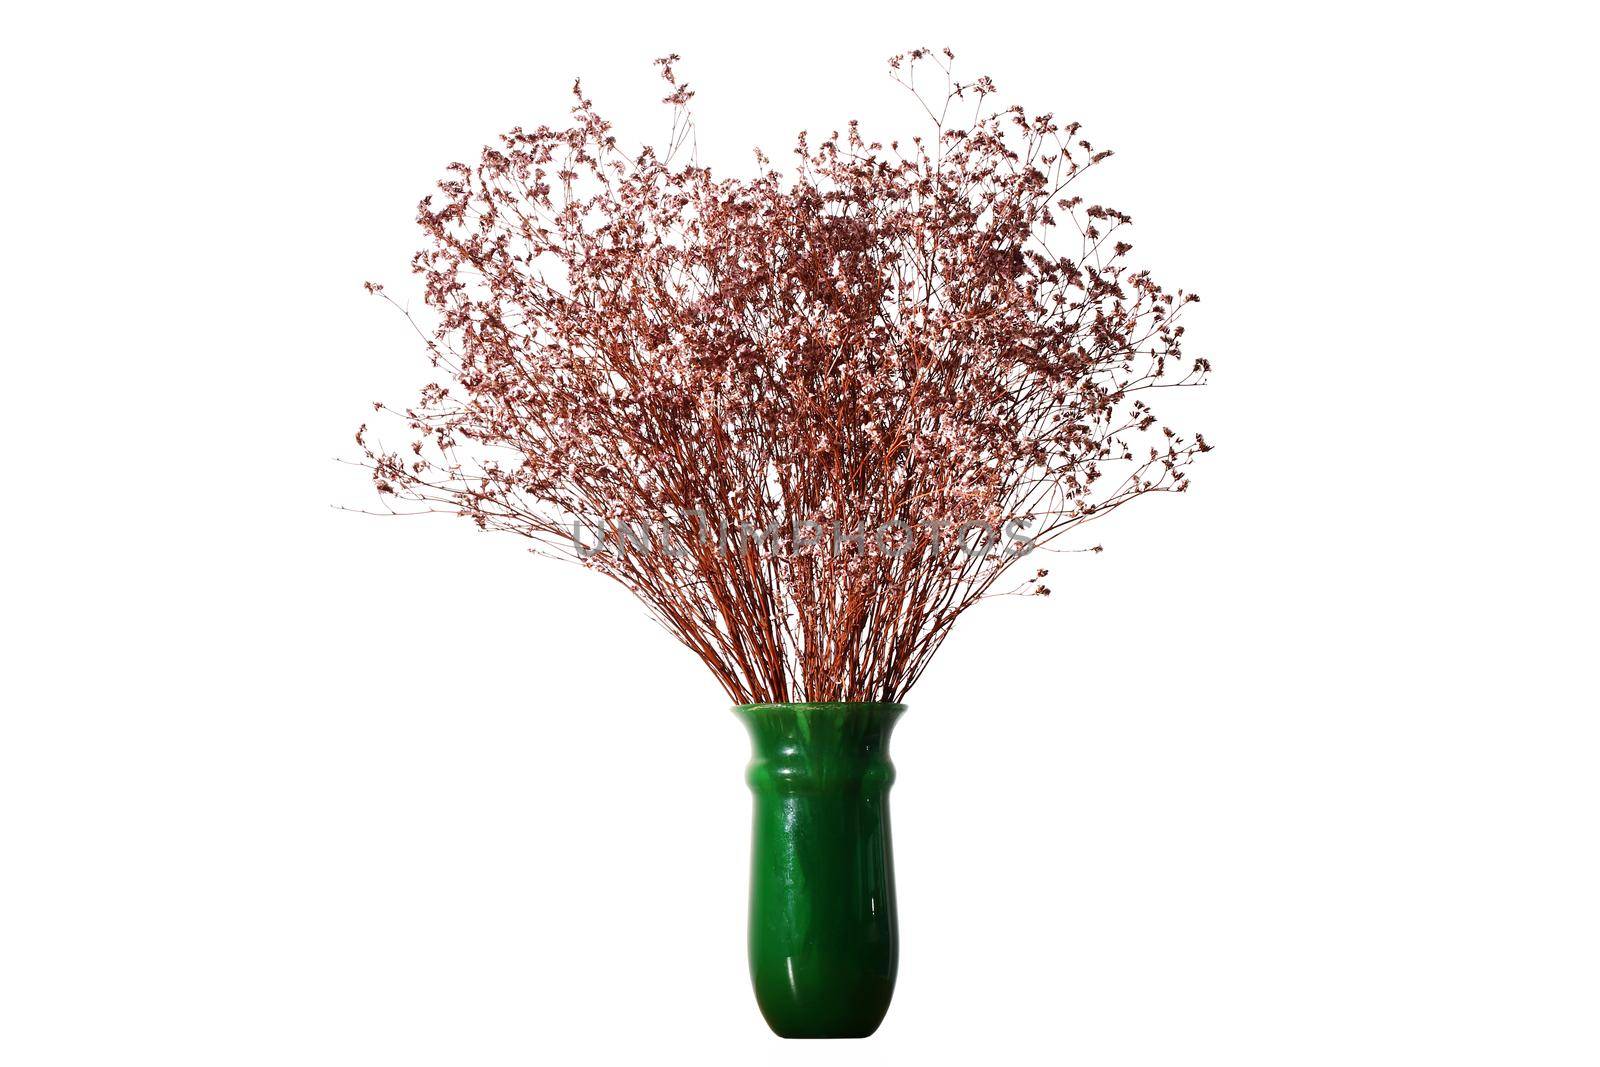 Dried flowers on vase by Wasant